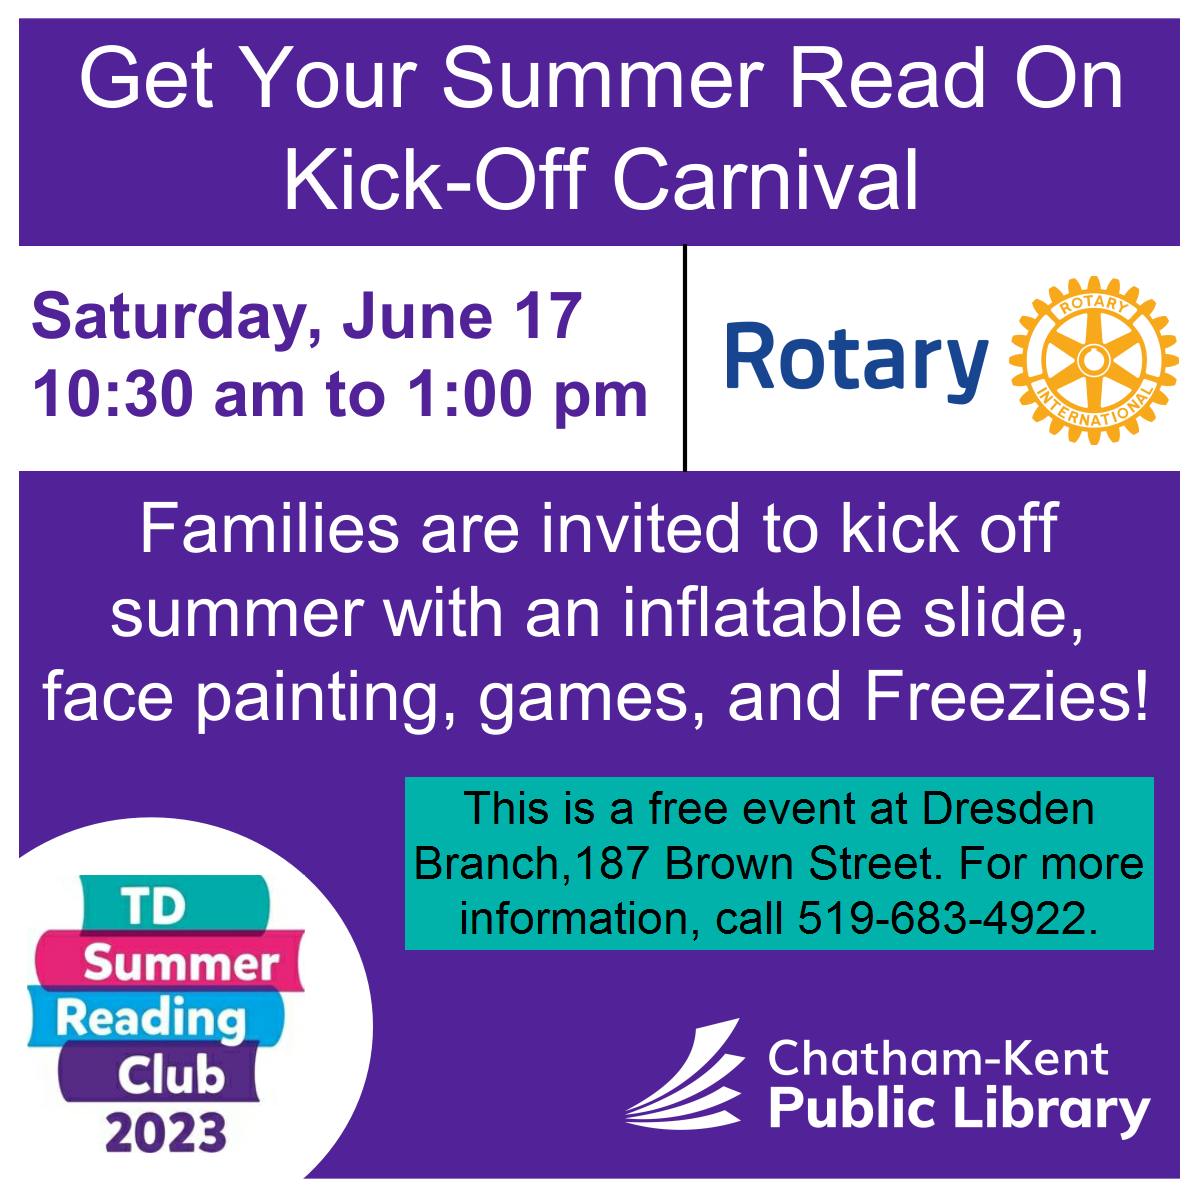 Join the Chatham-Kent Public Library Dresden Branch on Saturday, June 17 from 10:30 am to 1pm to kick-off summer! There will be an inflatable slide, face painting, games, and Freezies! This is a #free event and everyone is welcome!
#YourTVCK #TrulyLocal #CKont #CKPL #Dresden